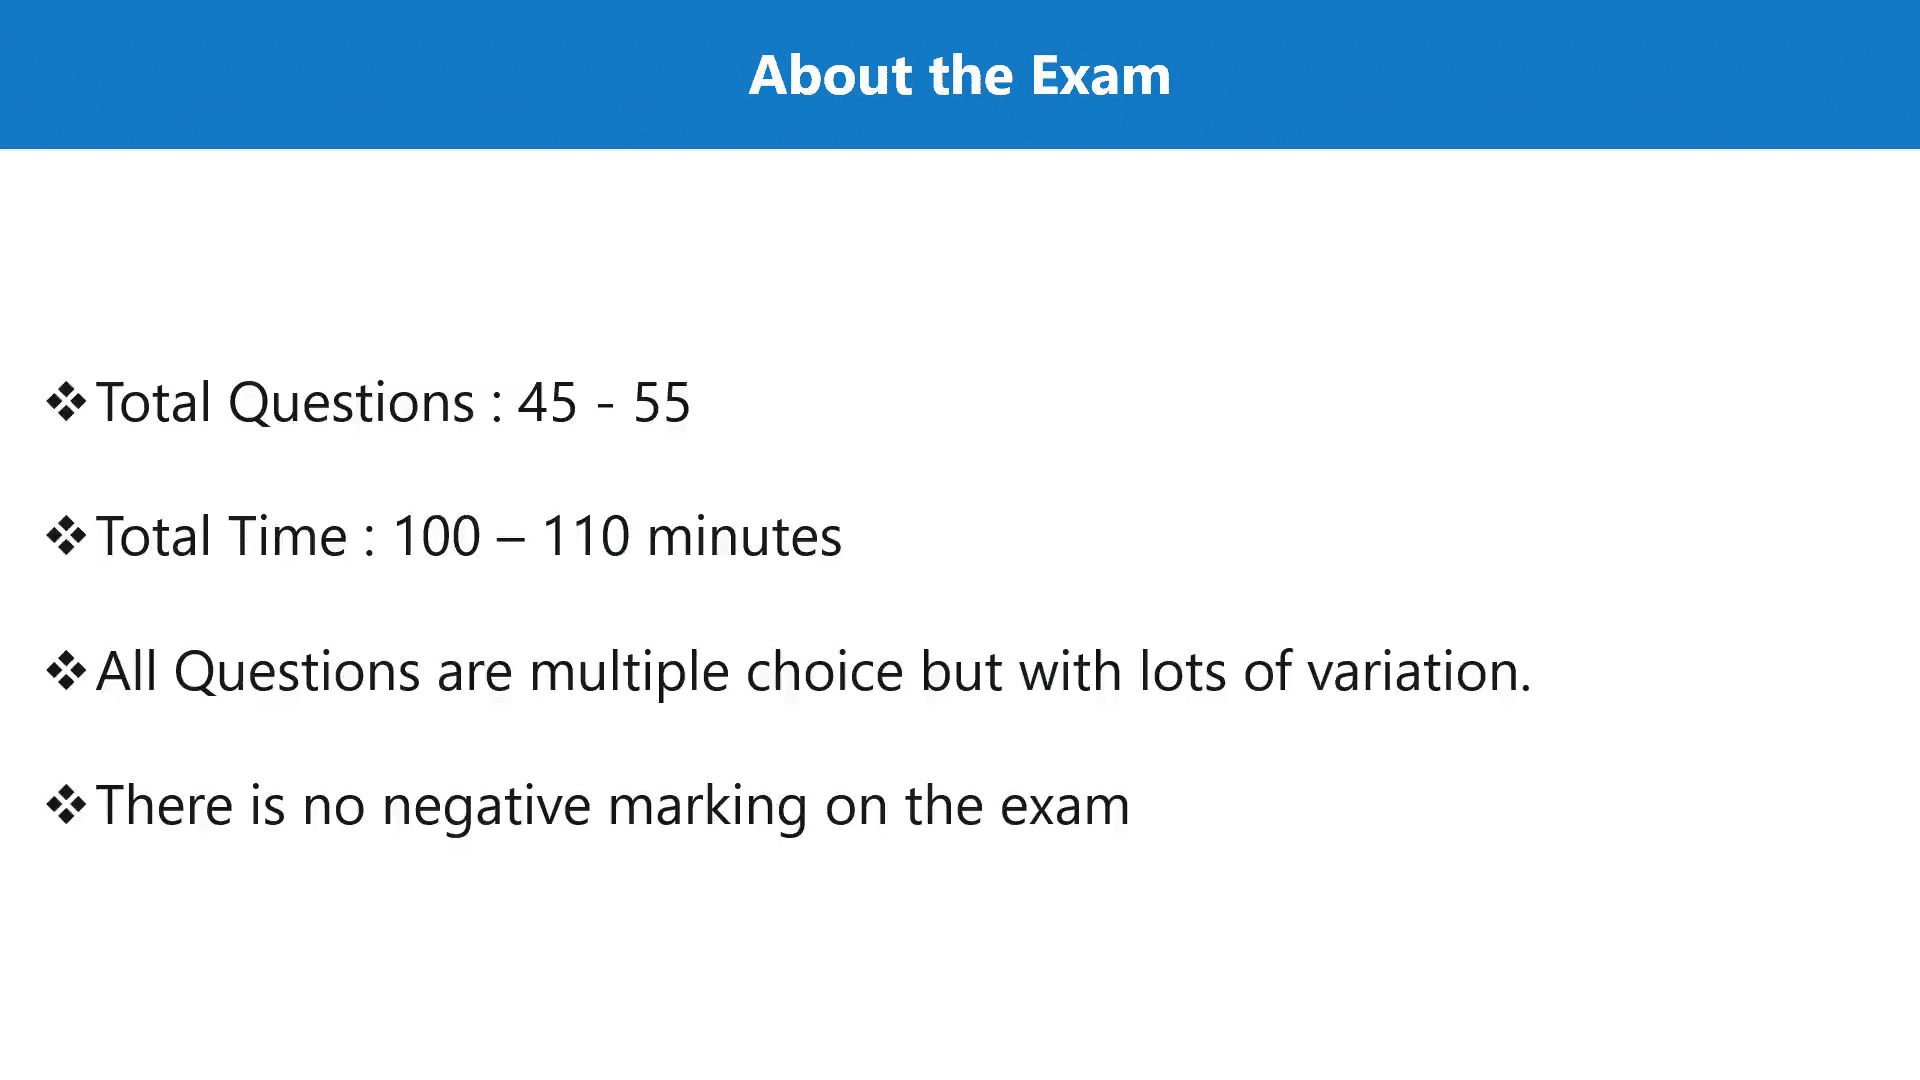 About the DP-500 exam